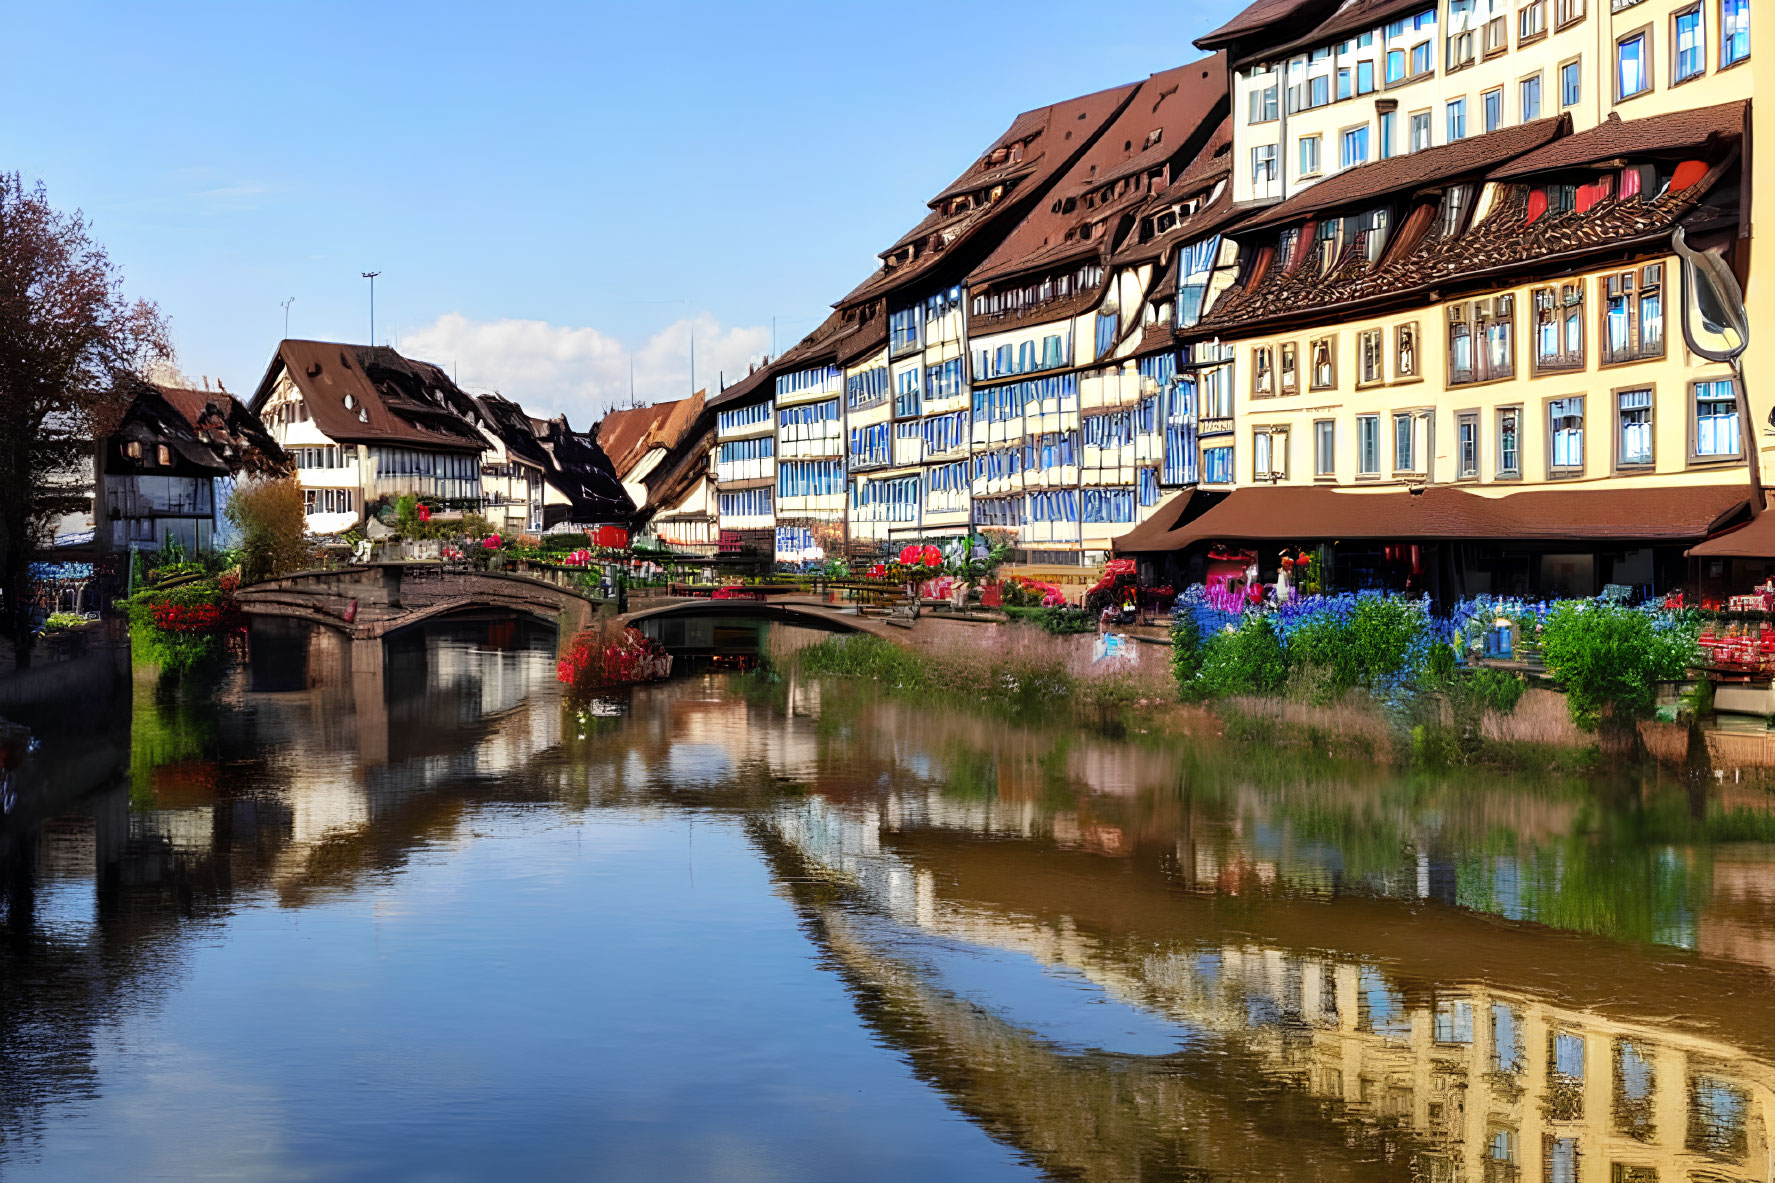 Tranquil river with timber-framed buildings and colorful flowers